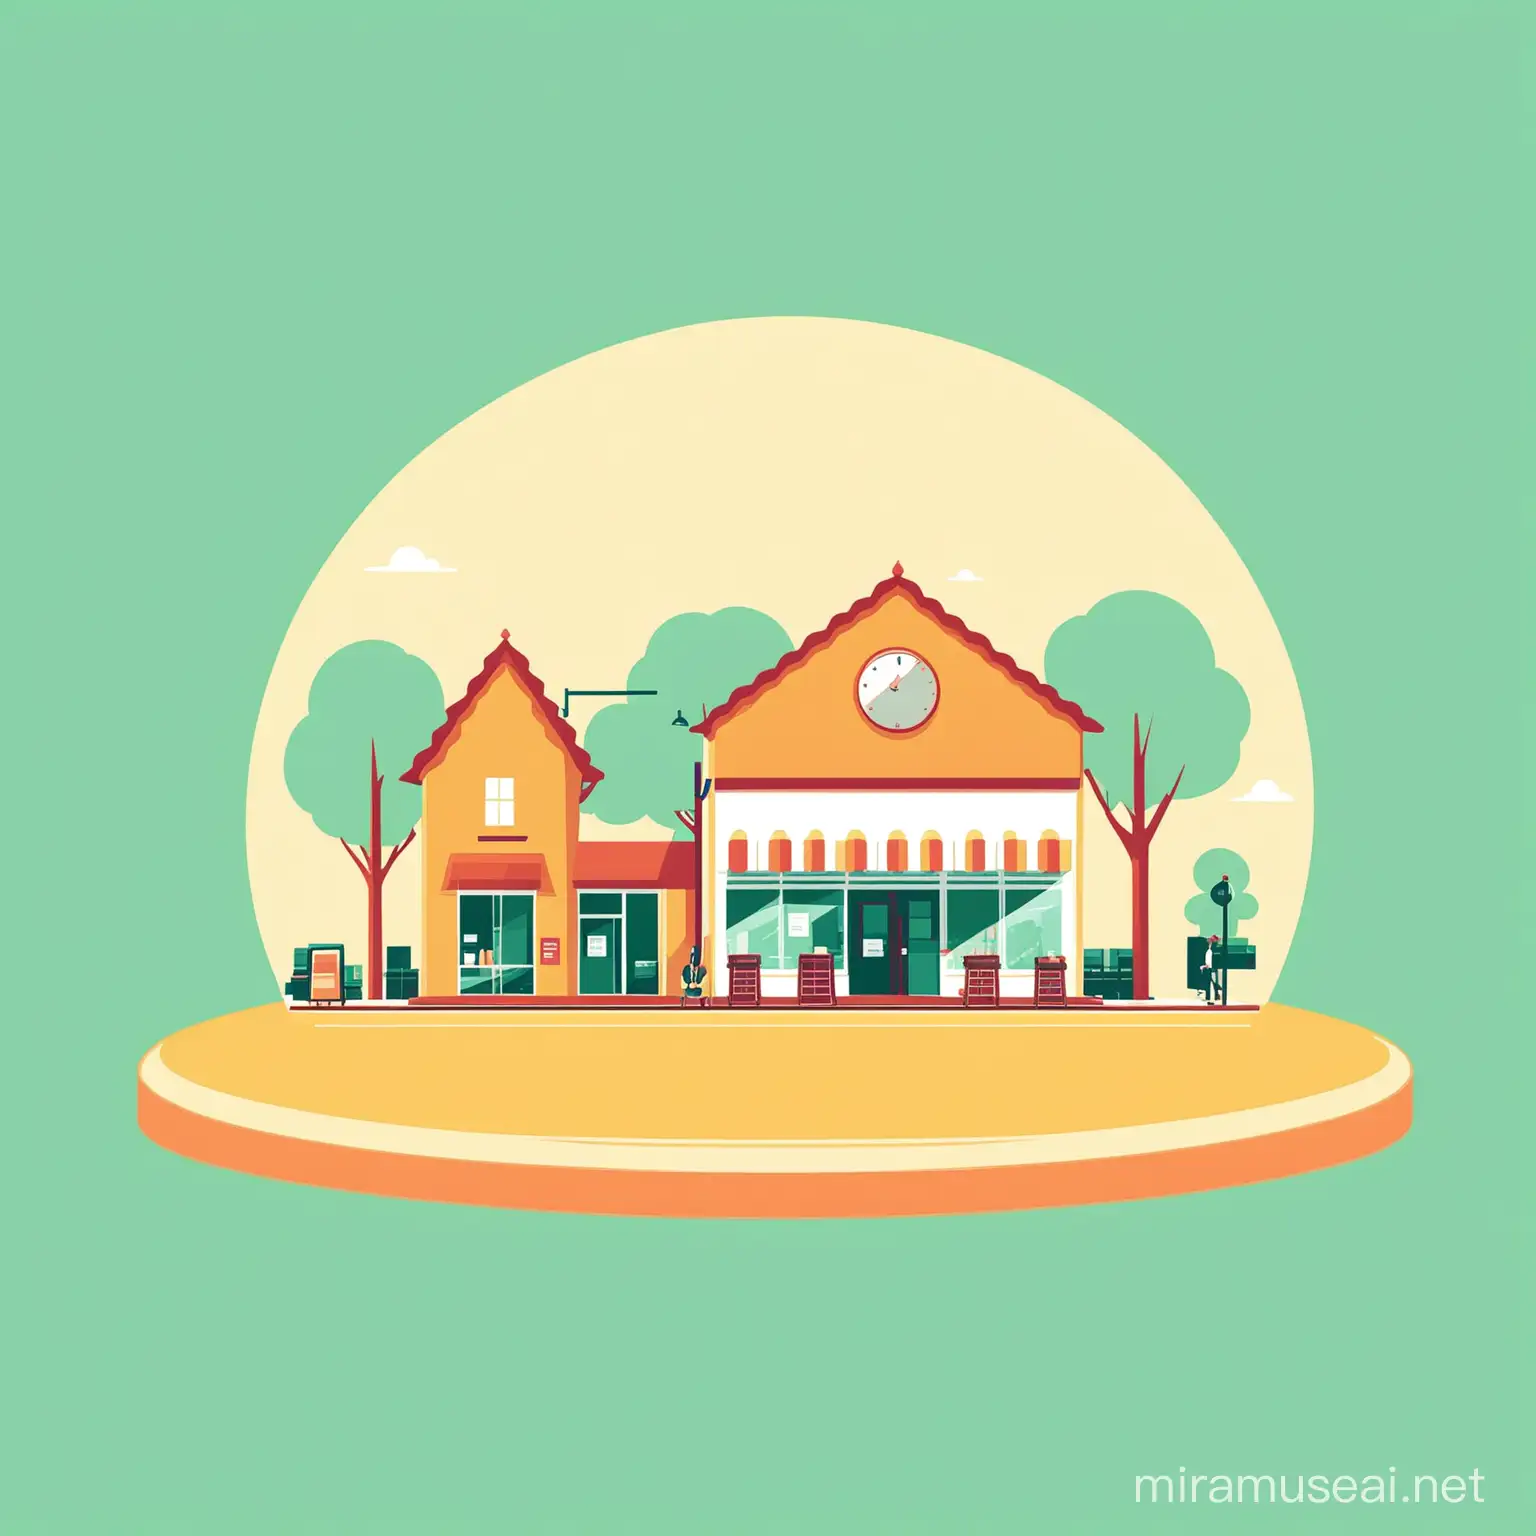 illustration a minimal graphic image about "starting a business in a small town" with a simple plain color background